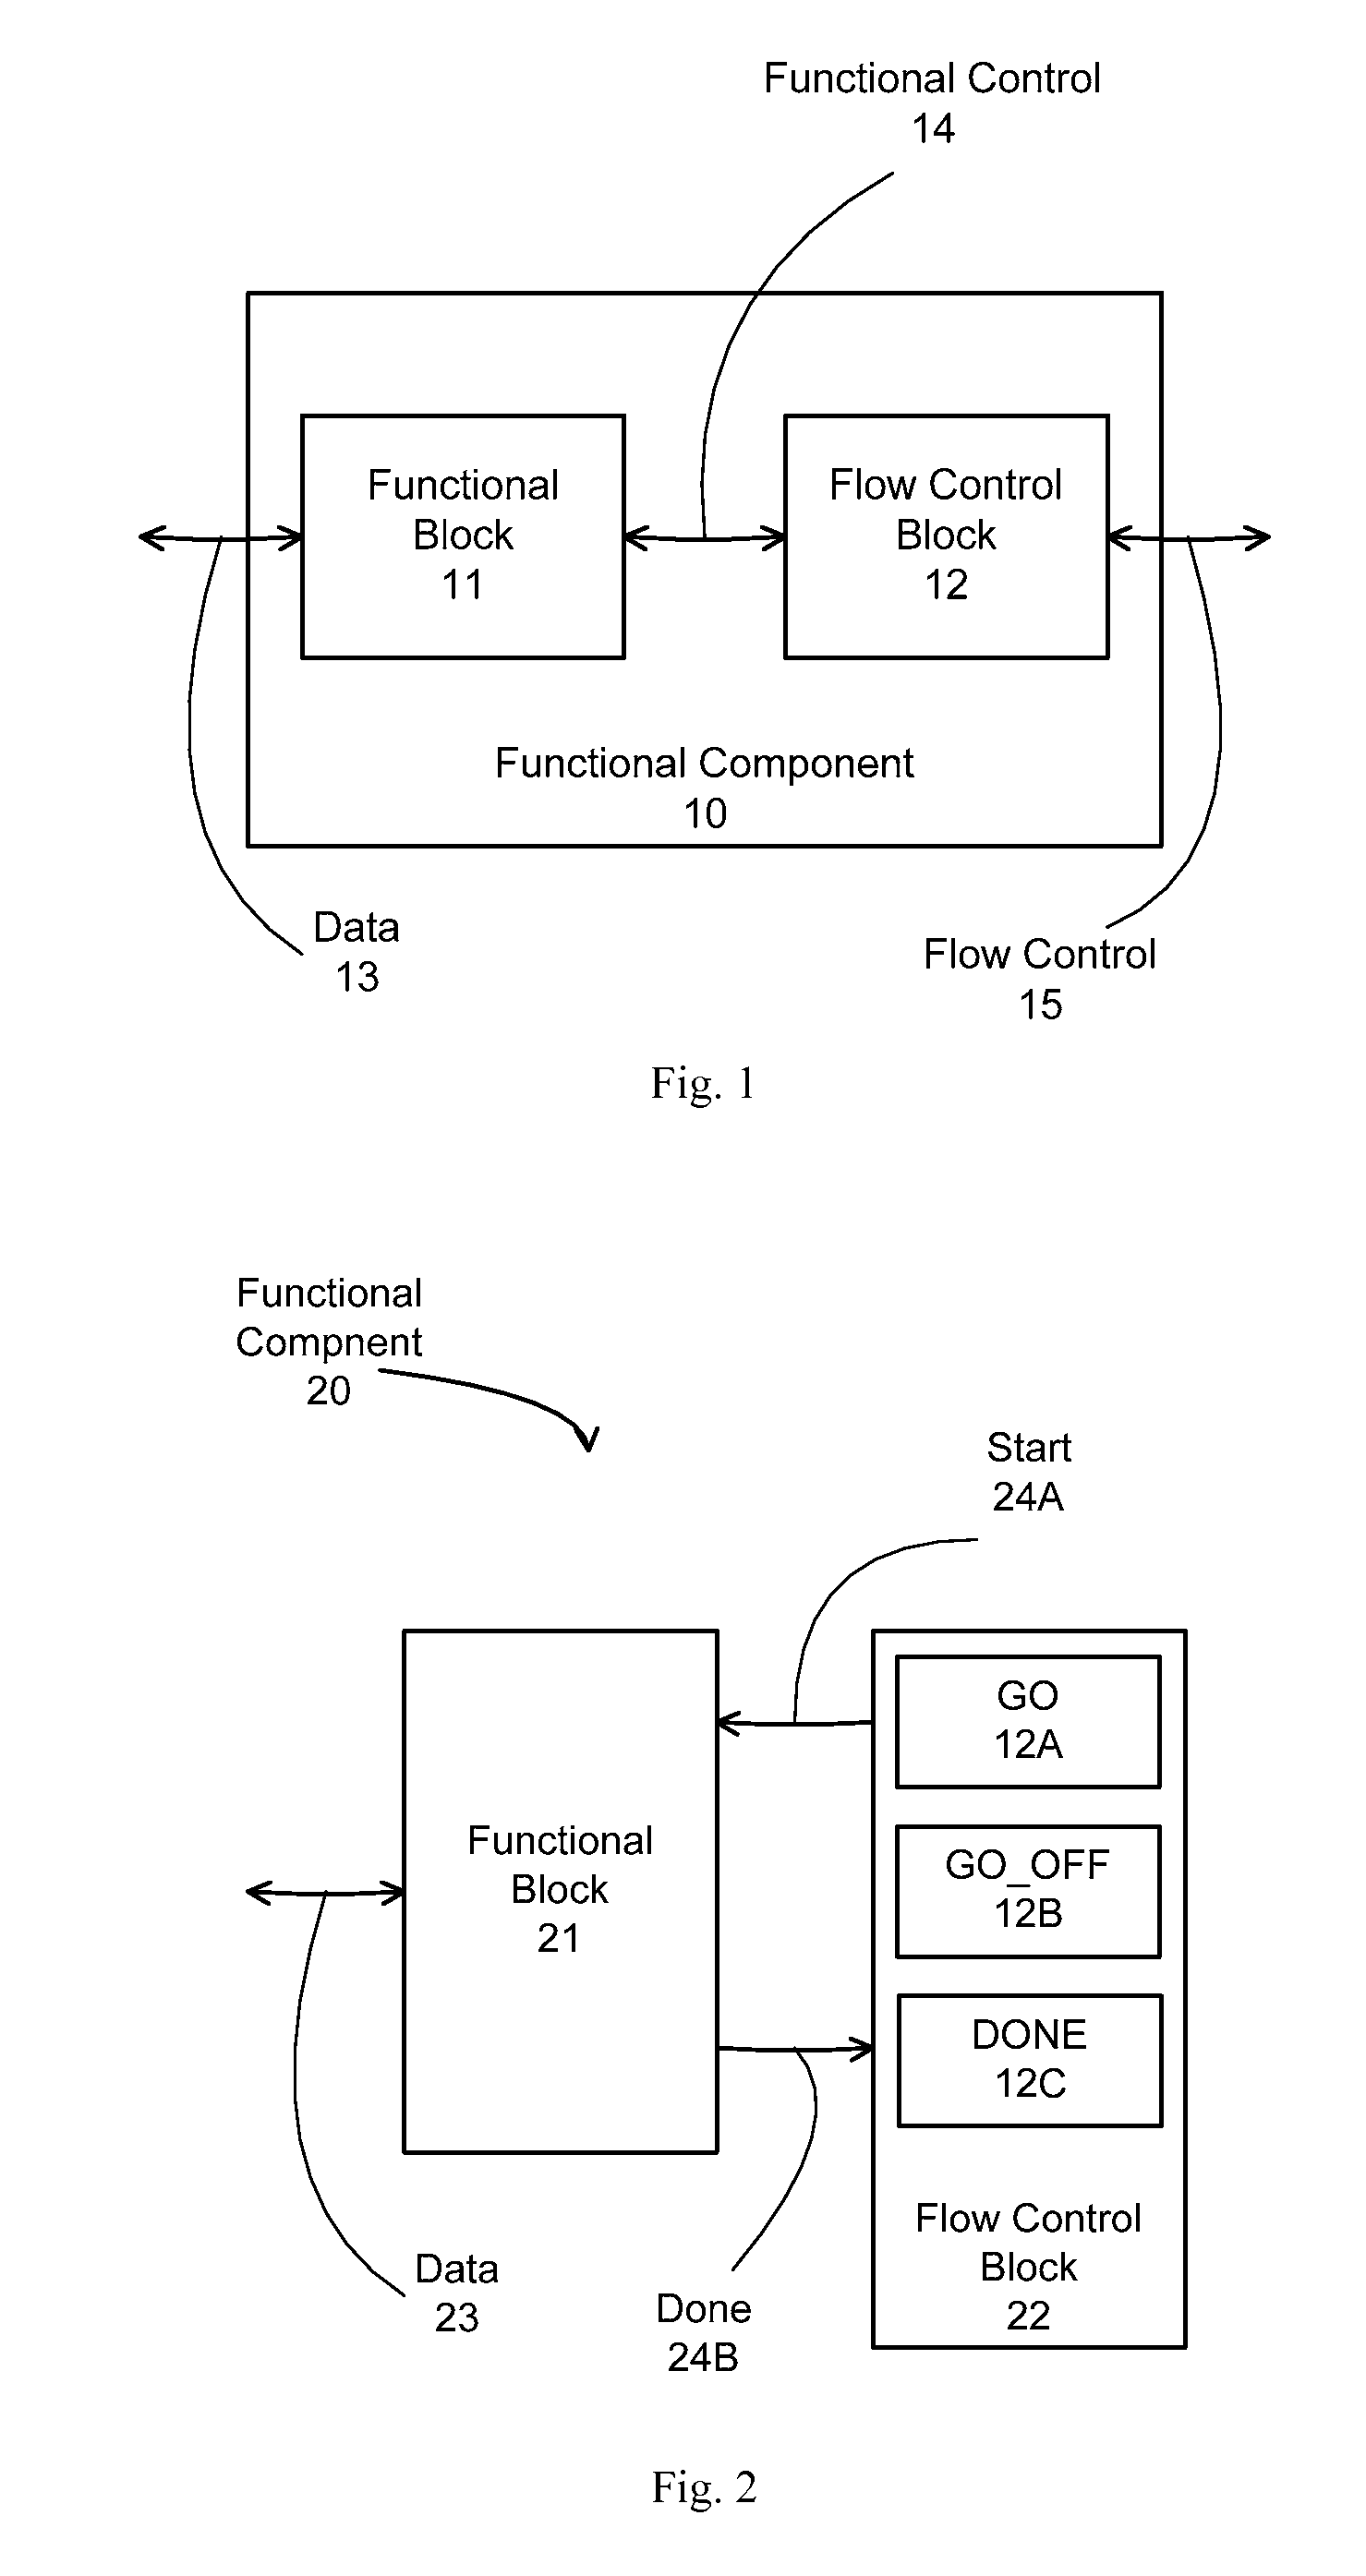 System and methods for connecting multiple functional components